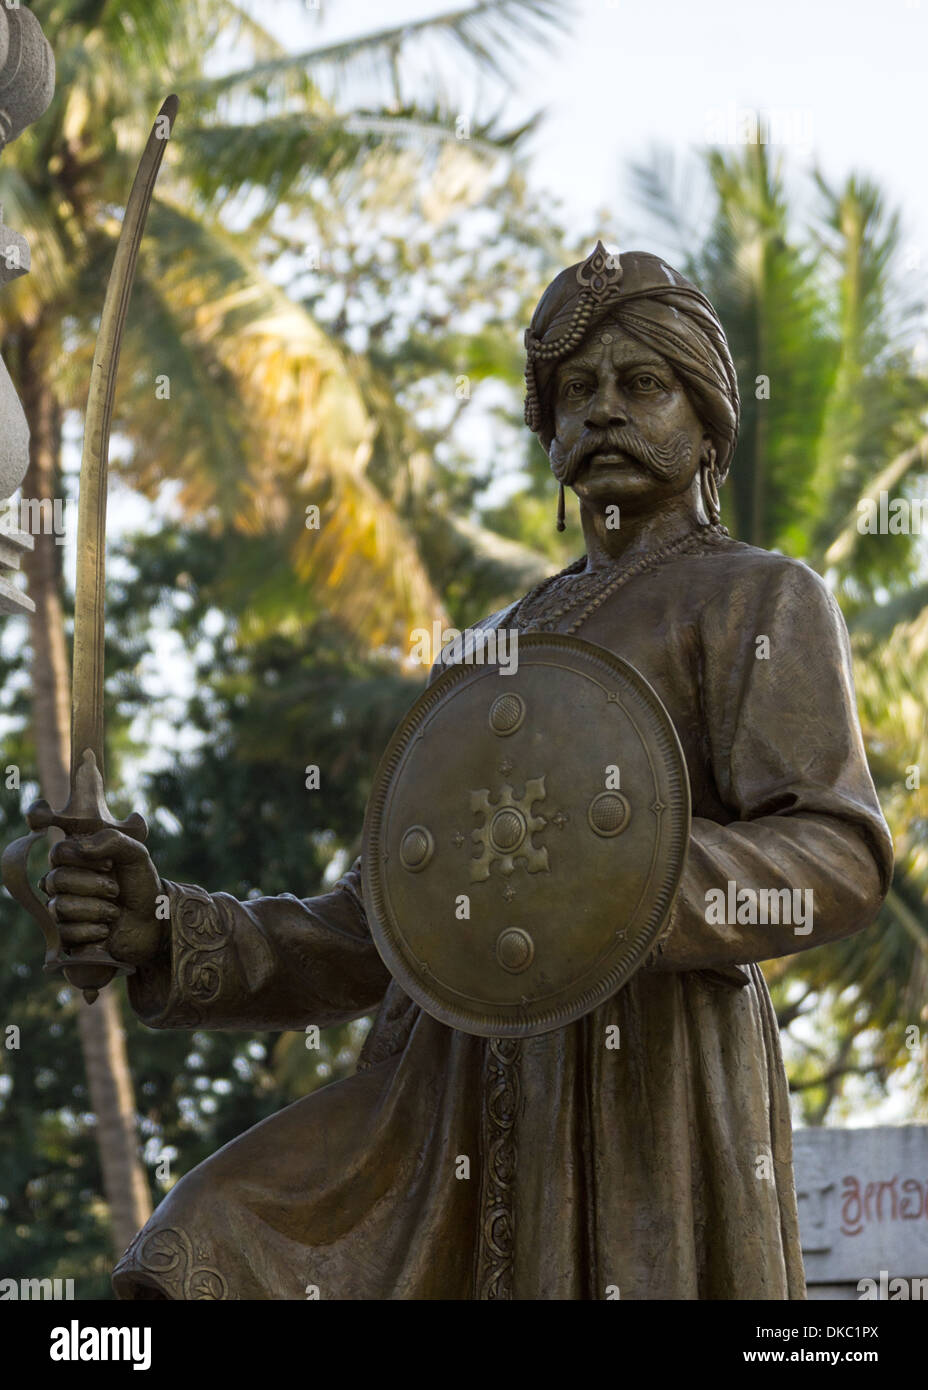 Close-up of statue of Kempe Gowda, founder of Bangalore. Stock Photo